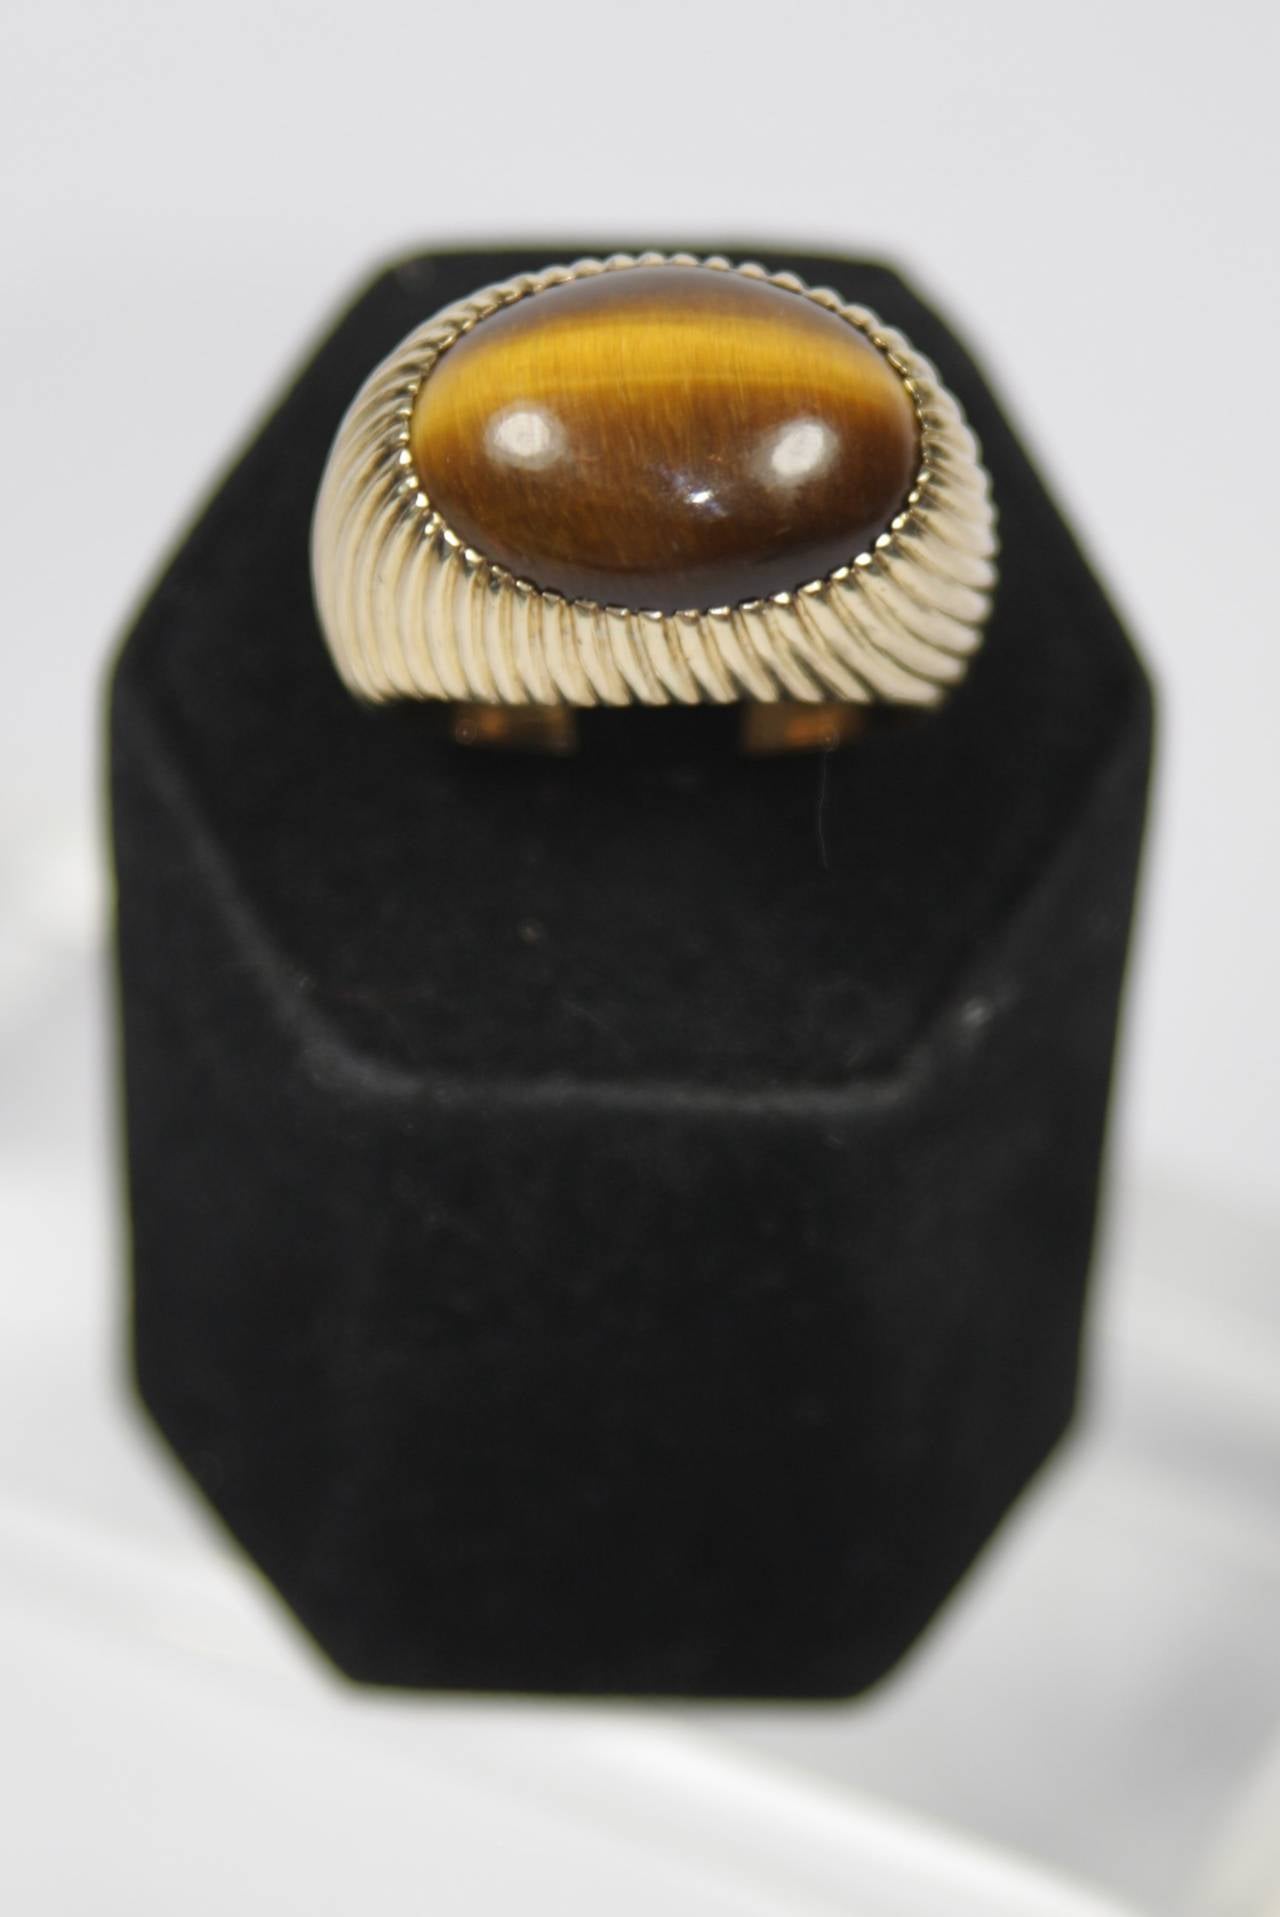 Specs: 
14 KT Gold Approximately 14.86 Grams
Tigers Eye Measures 1